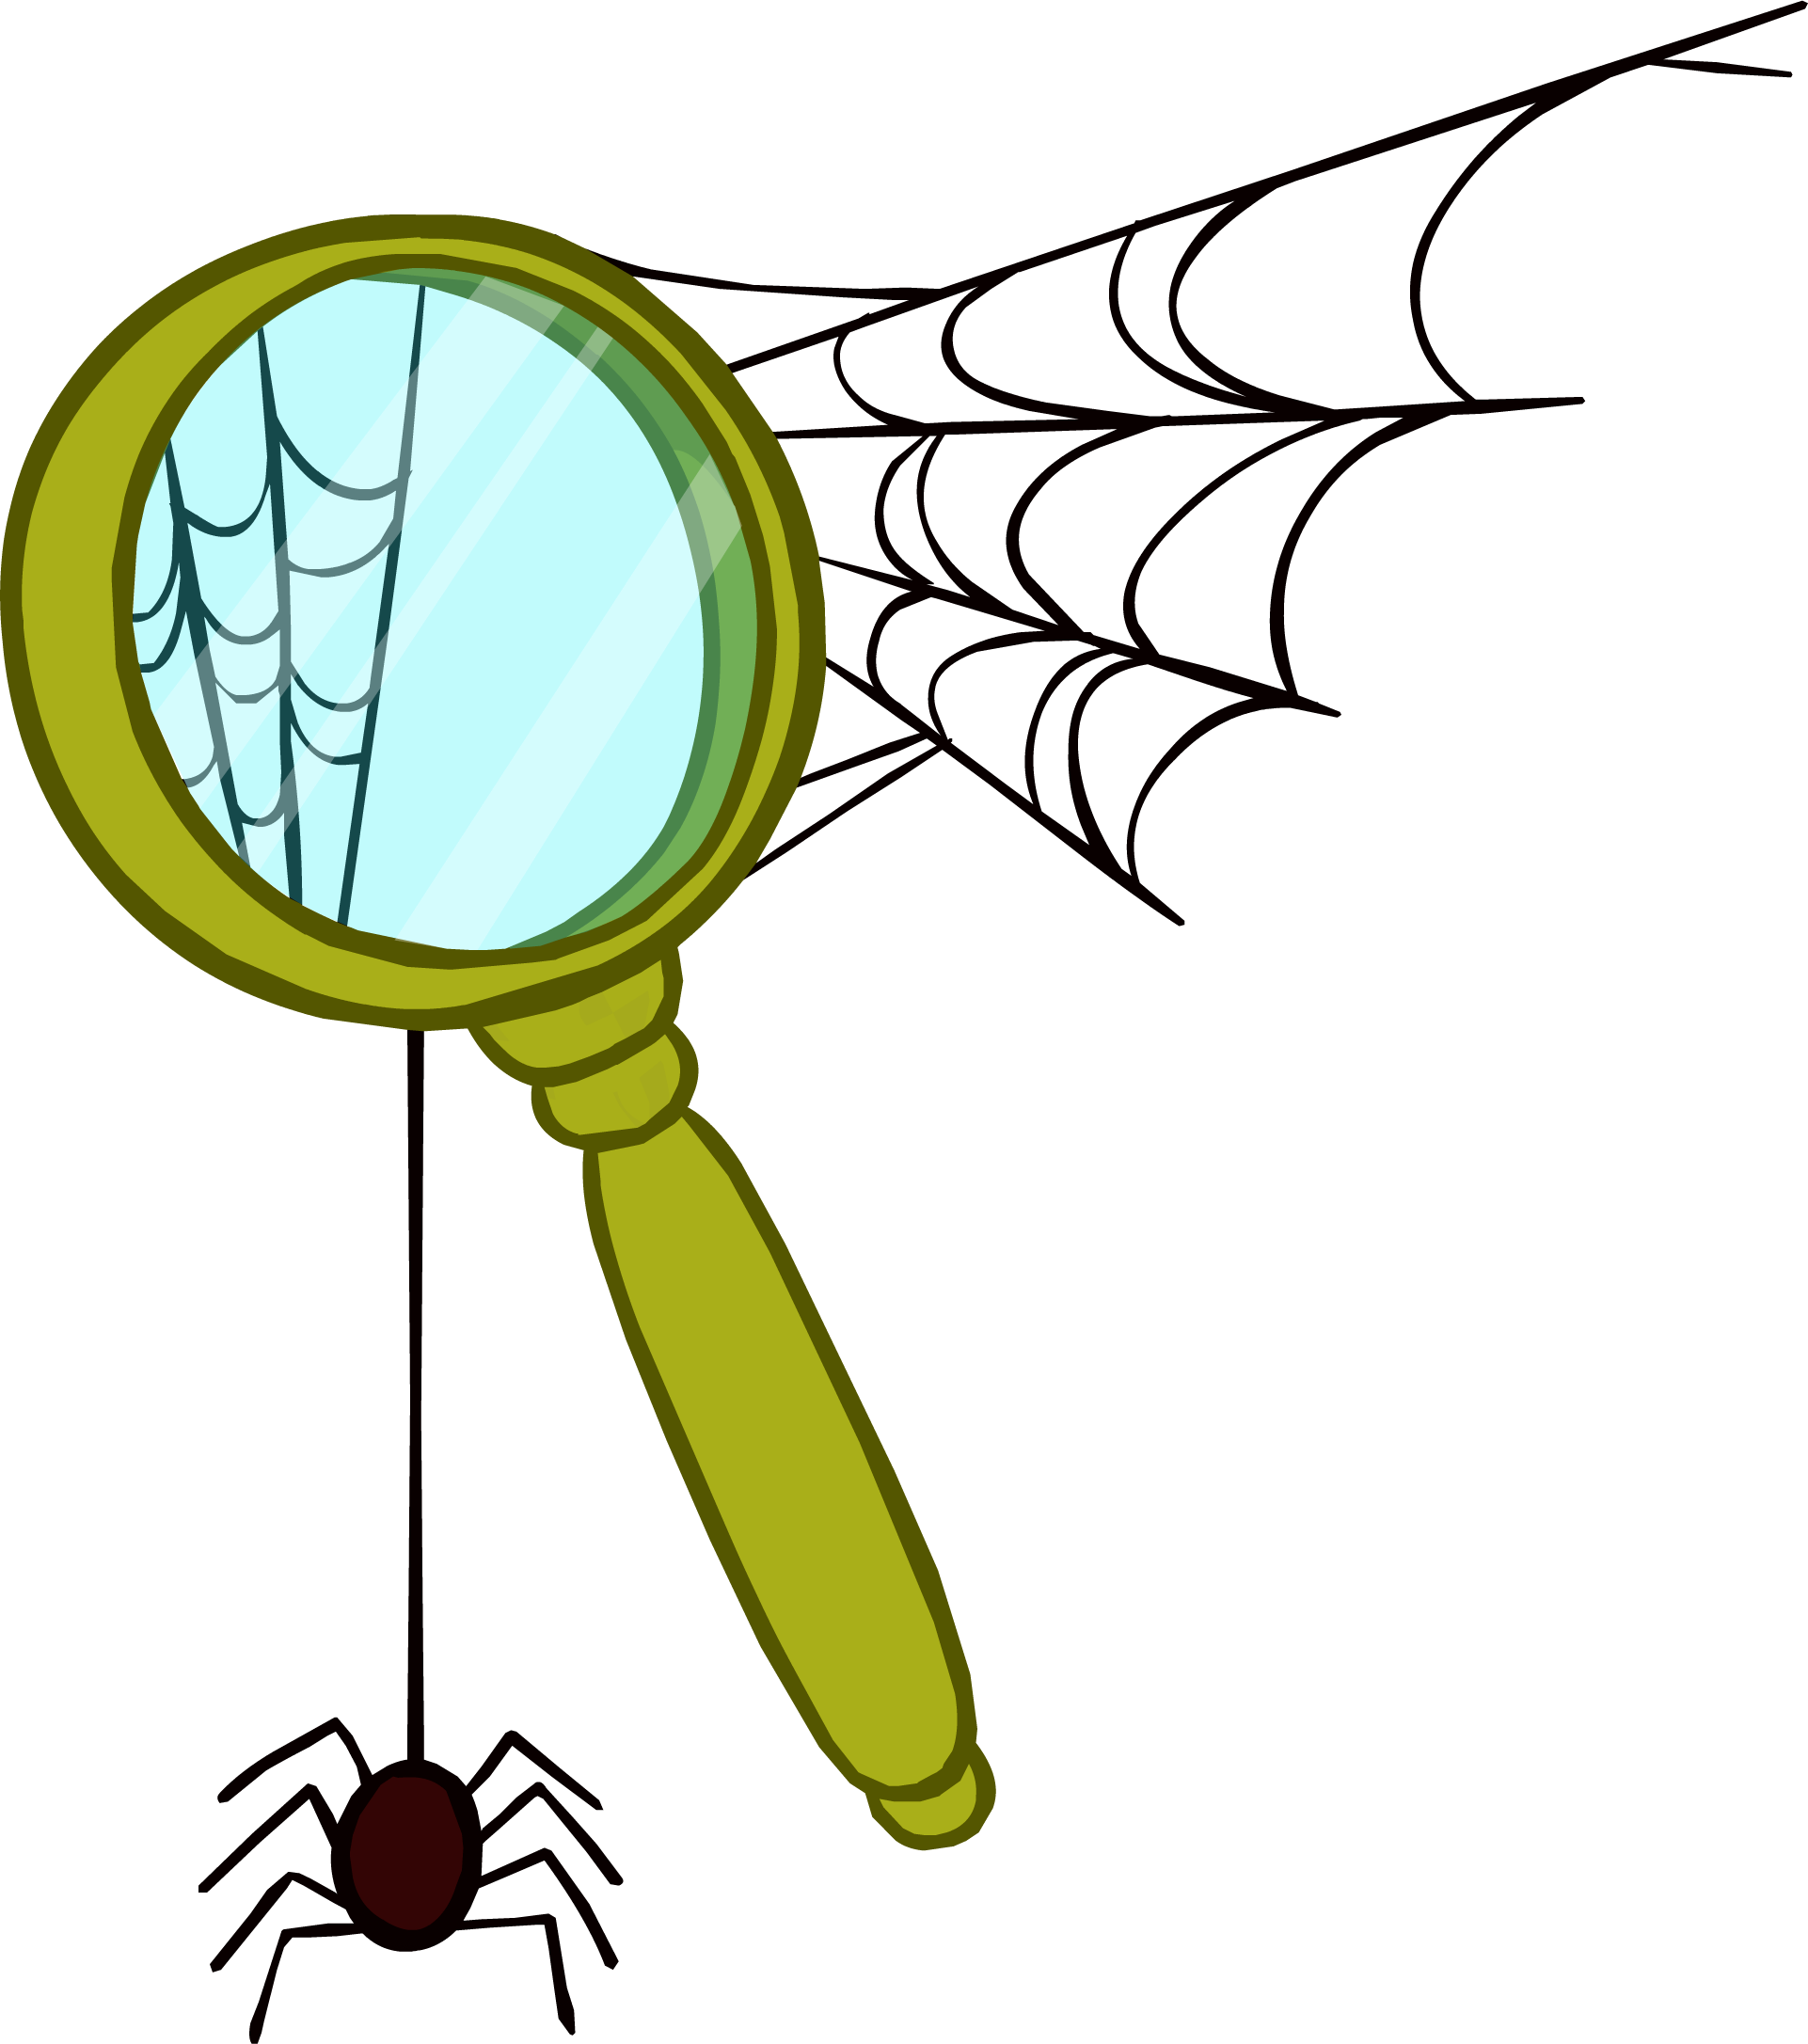 Inspector's Magnifying Glass - Magnifying Glass Club Penguin (1922x2173)